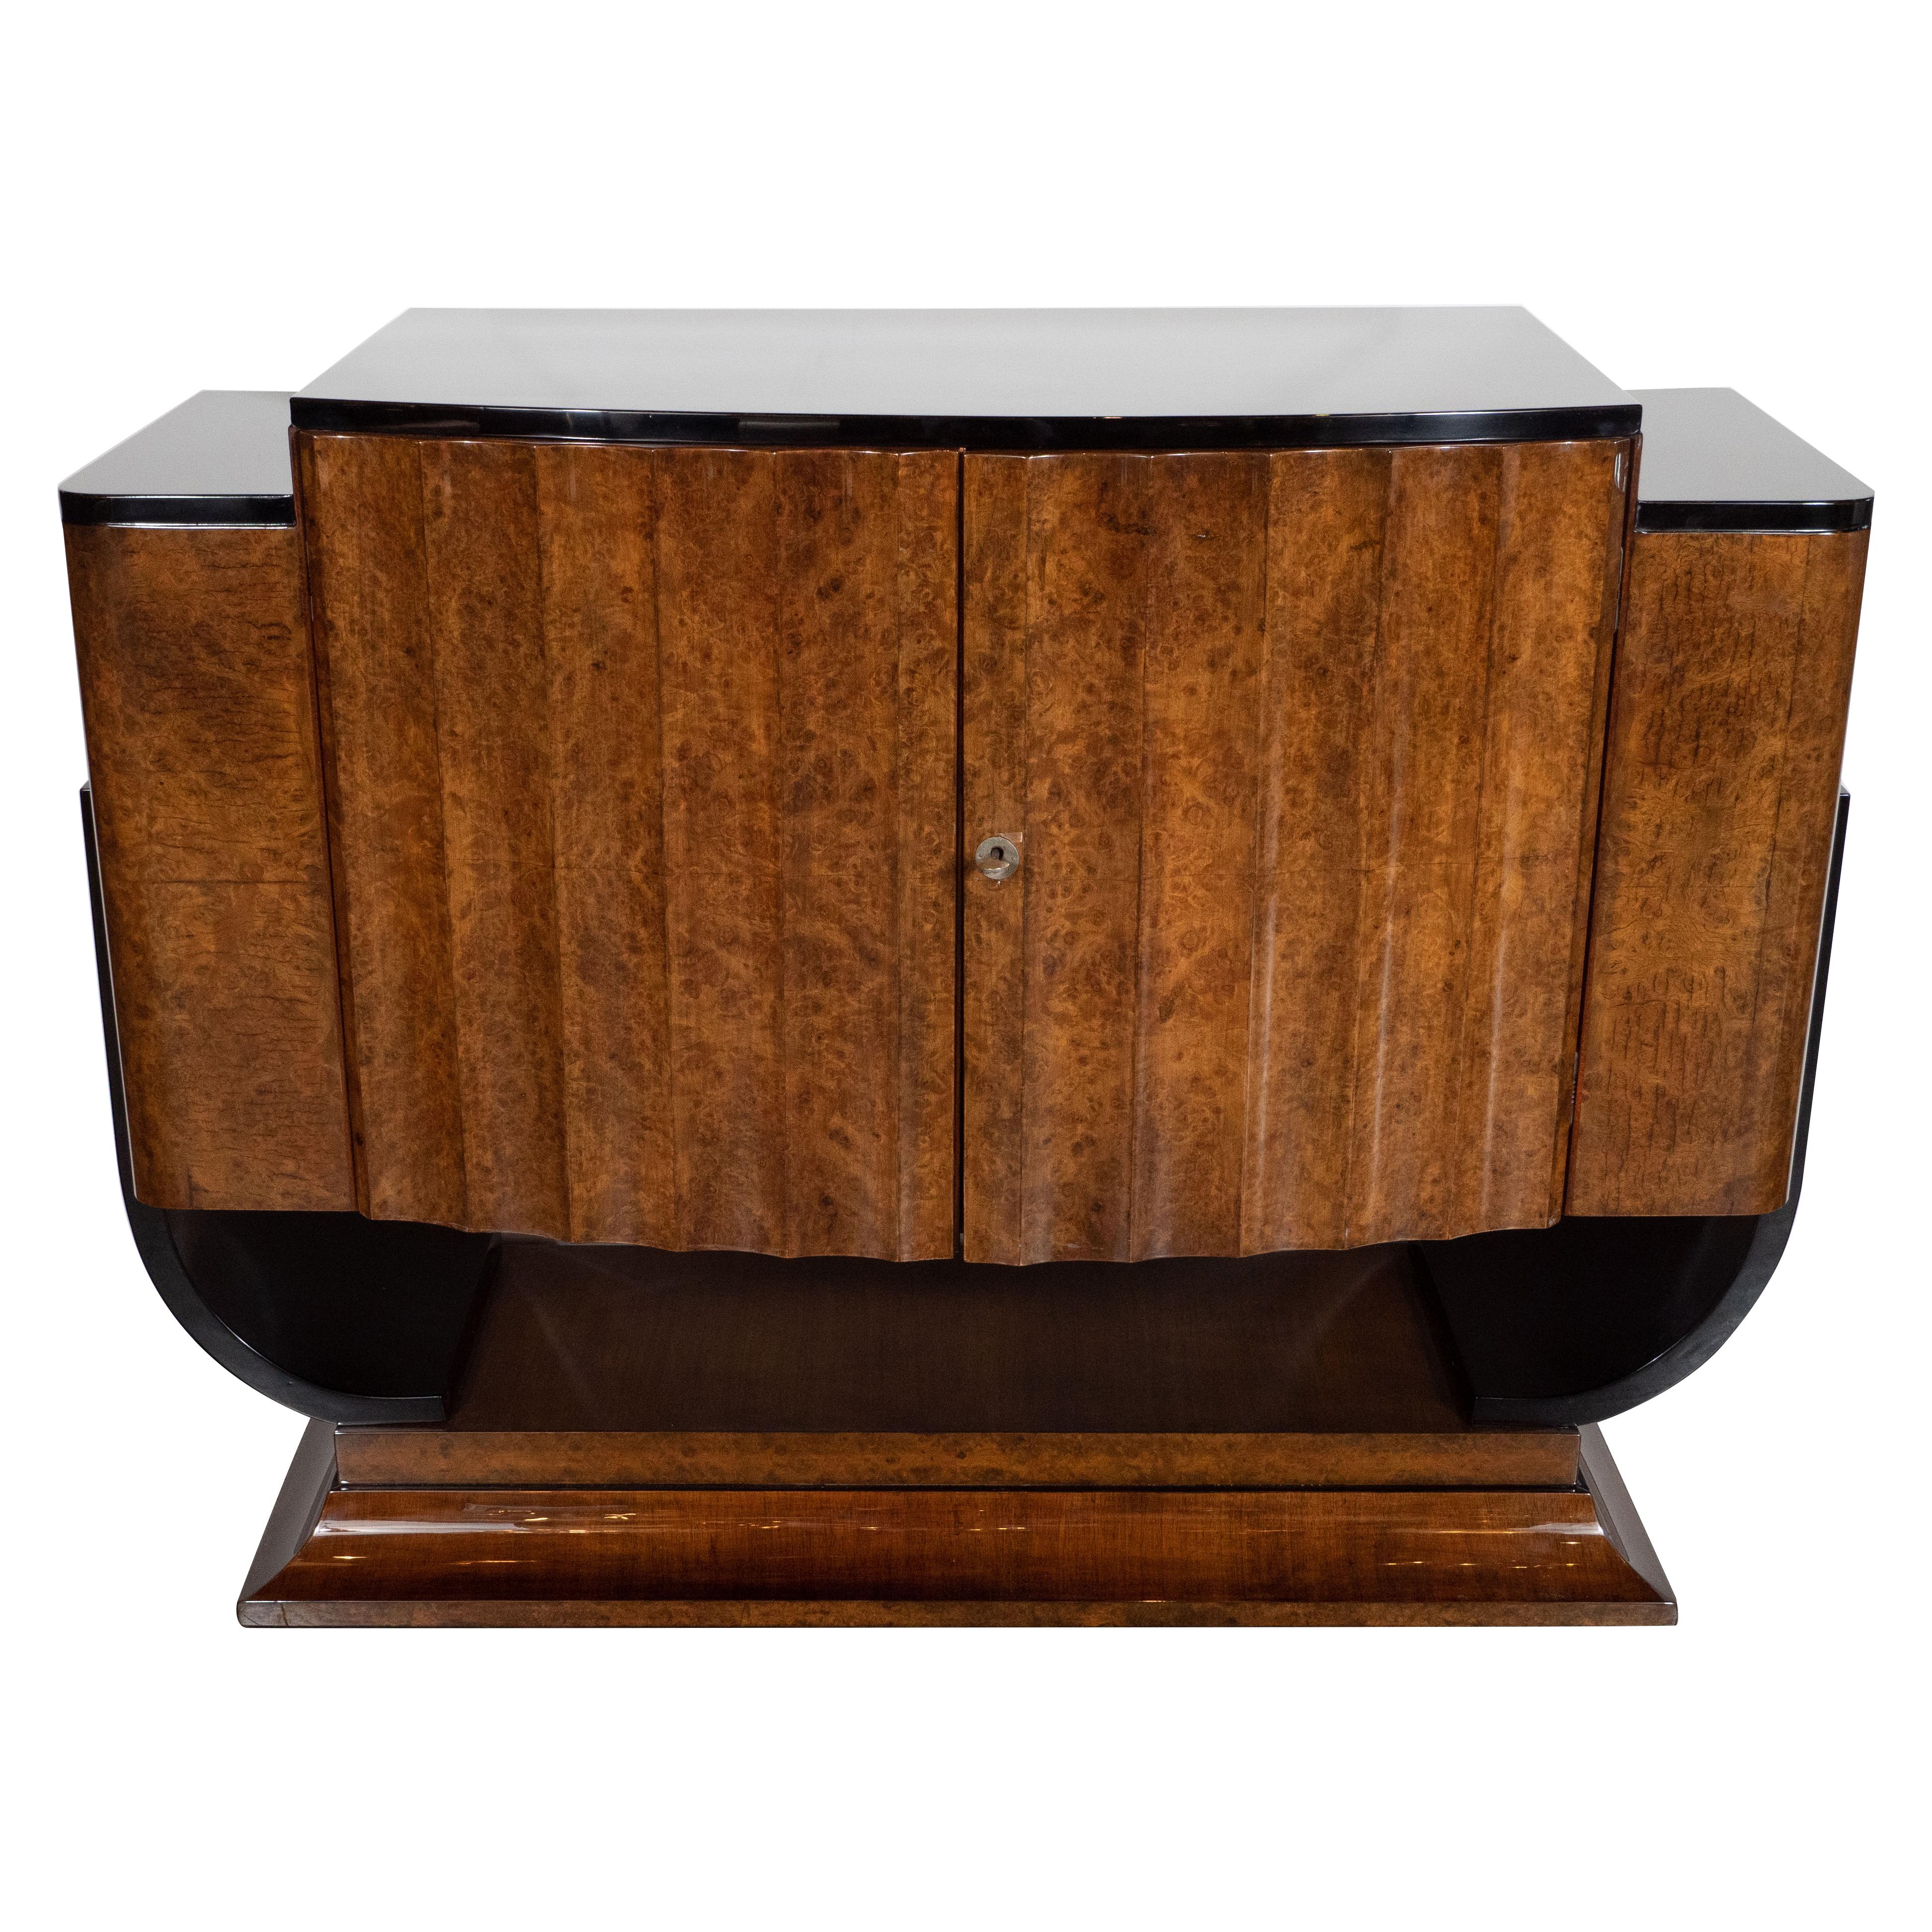 This stunning Art Deco cabinet was realized in the United Kingdom, circa 1930. It features a plinth style concave tiered rectangular base with black lacquer detailing that ascends into two U-form streamlined supports also in black lacquer. The